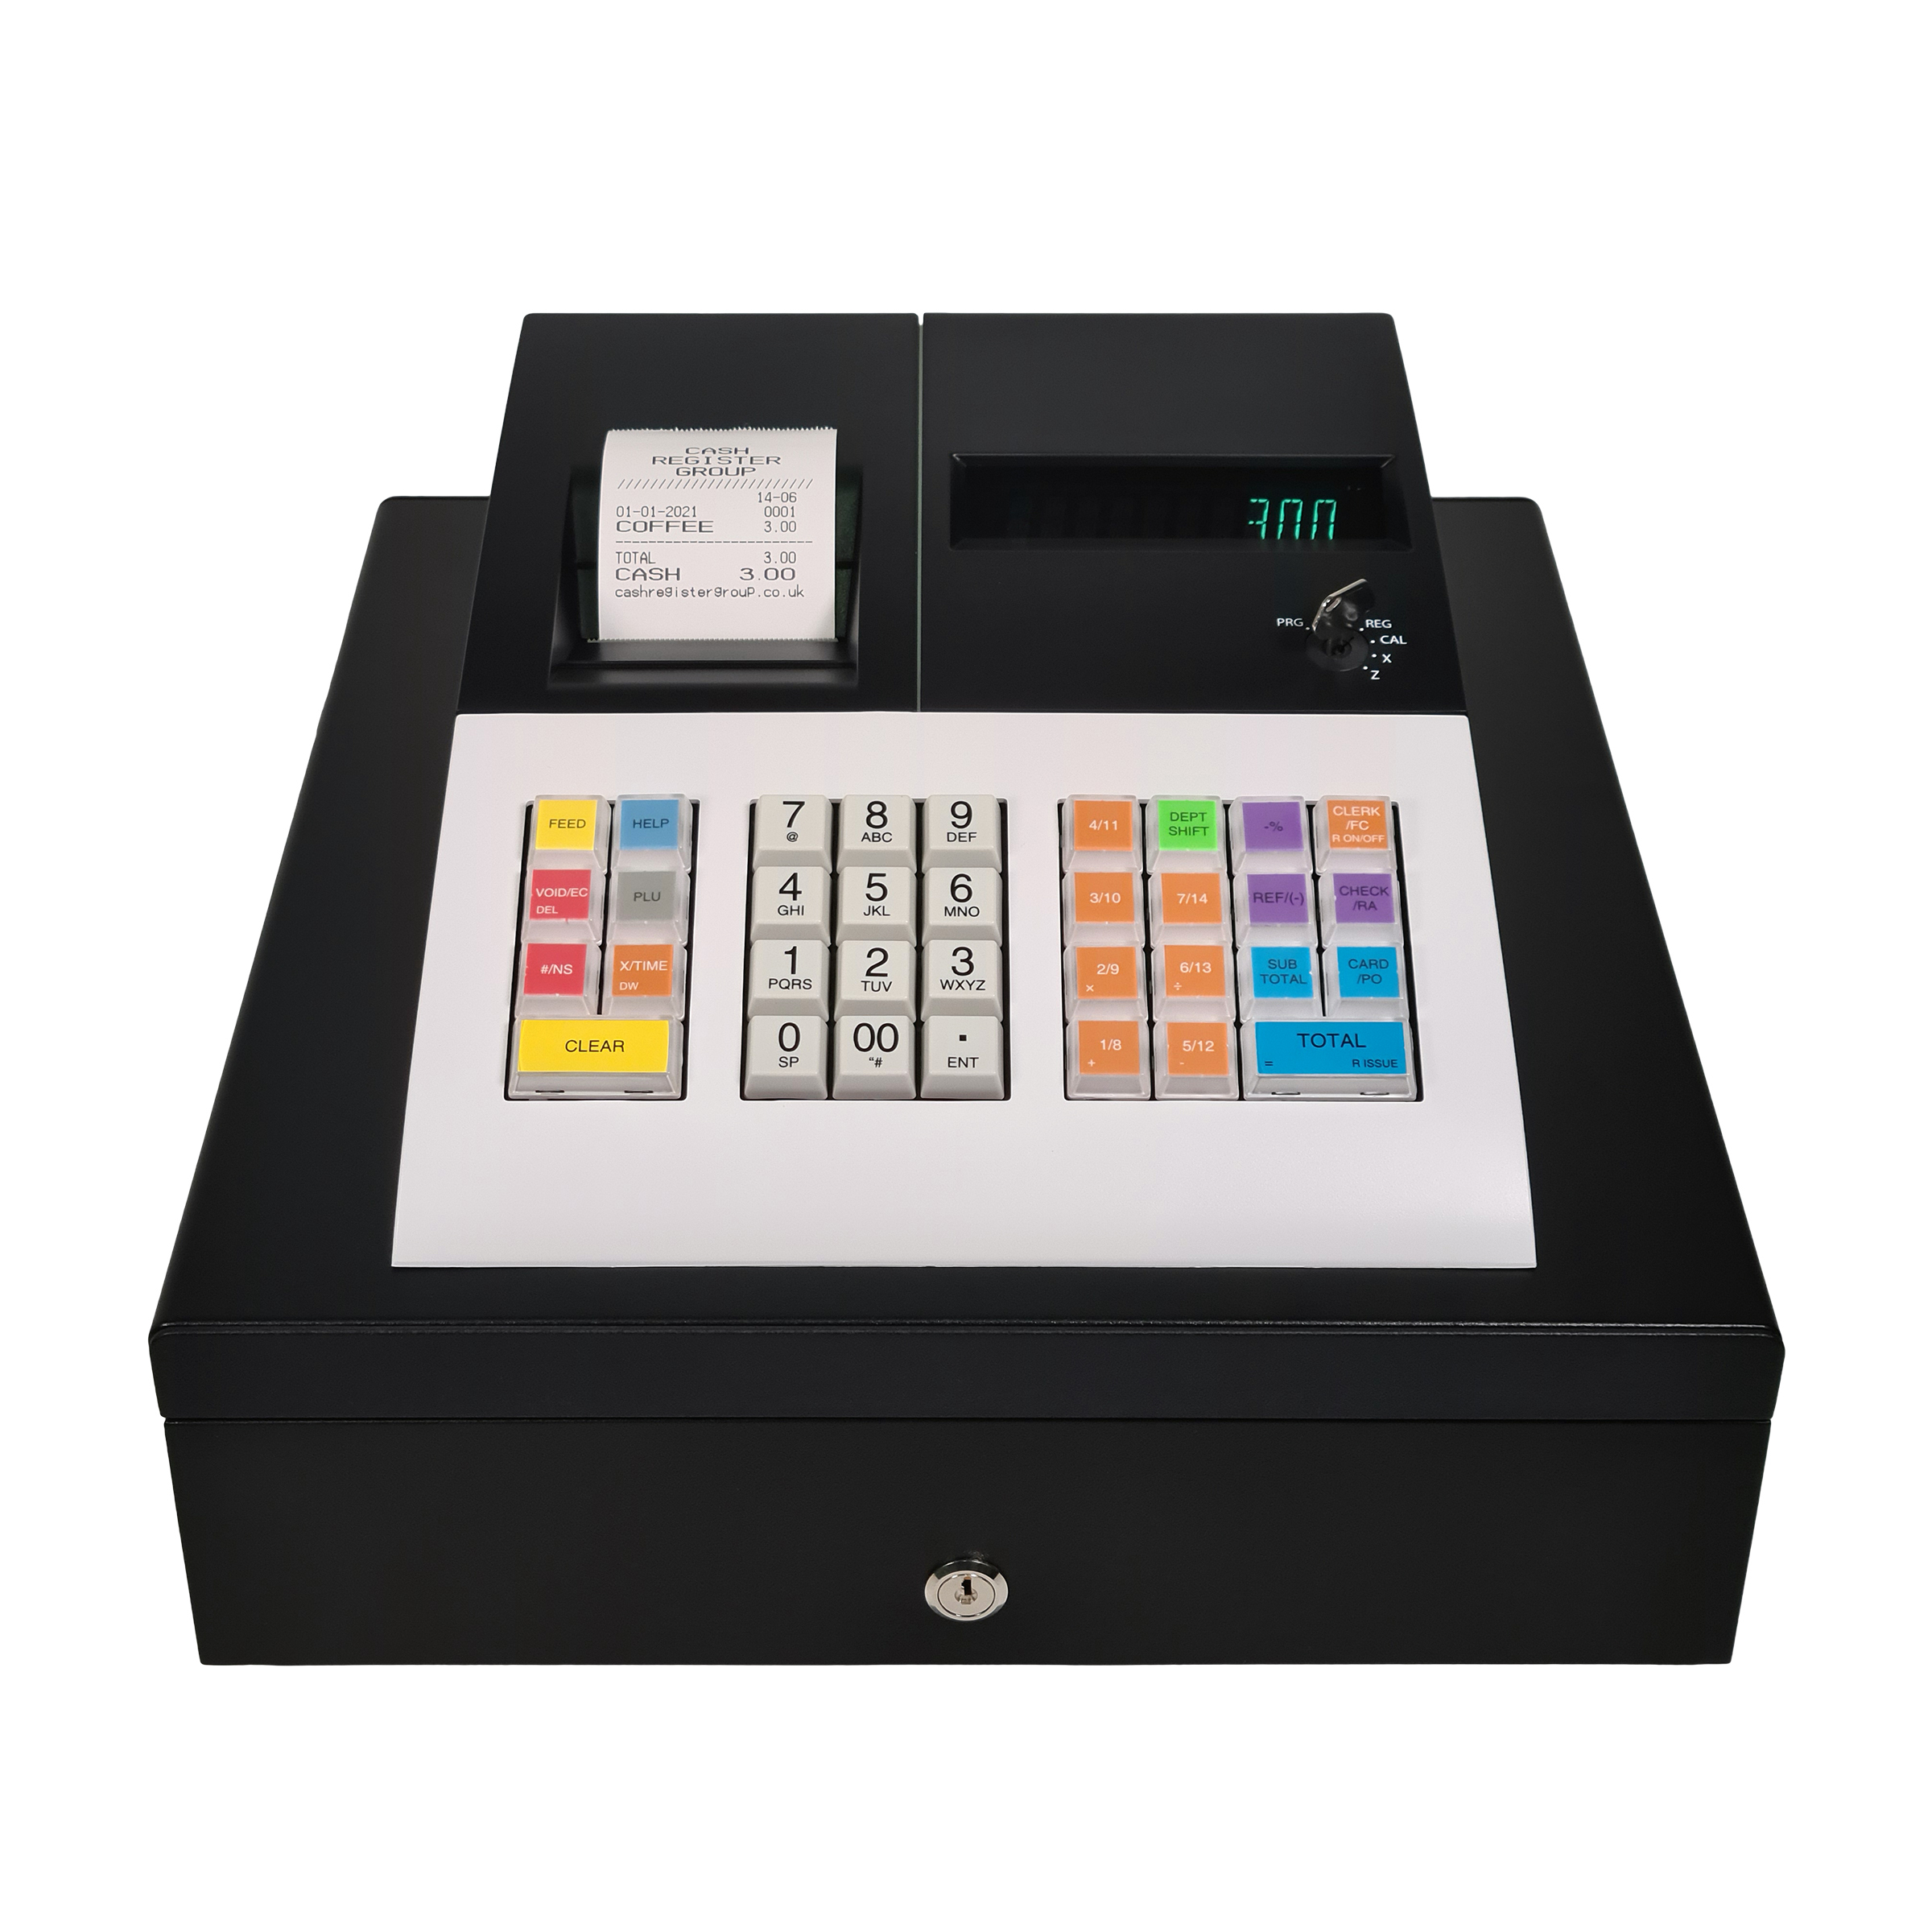 CRG2 Basic Cash Register - Small Base - OUT OF STOCK